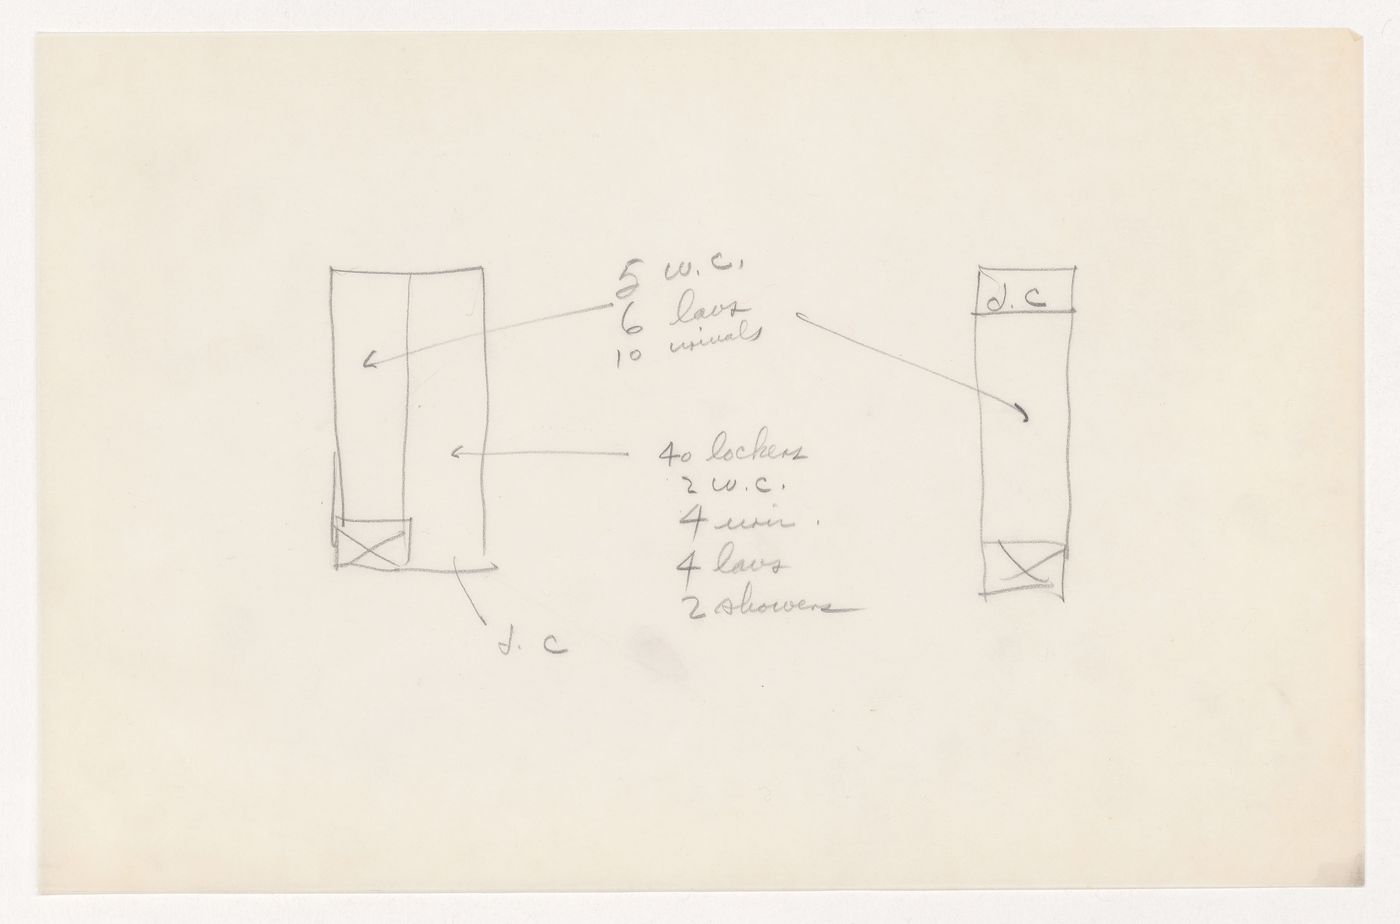 Partial sketch plans for lavatories, showers and lockers for the Metallurgy Building, Illinois Institute of Technology, Chicago